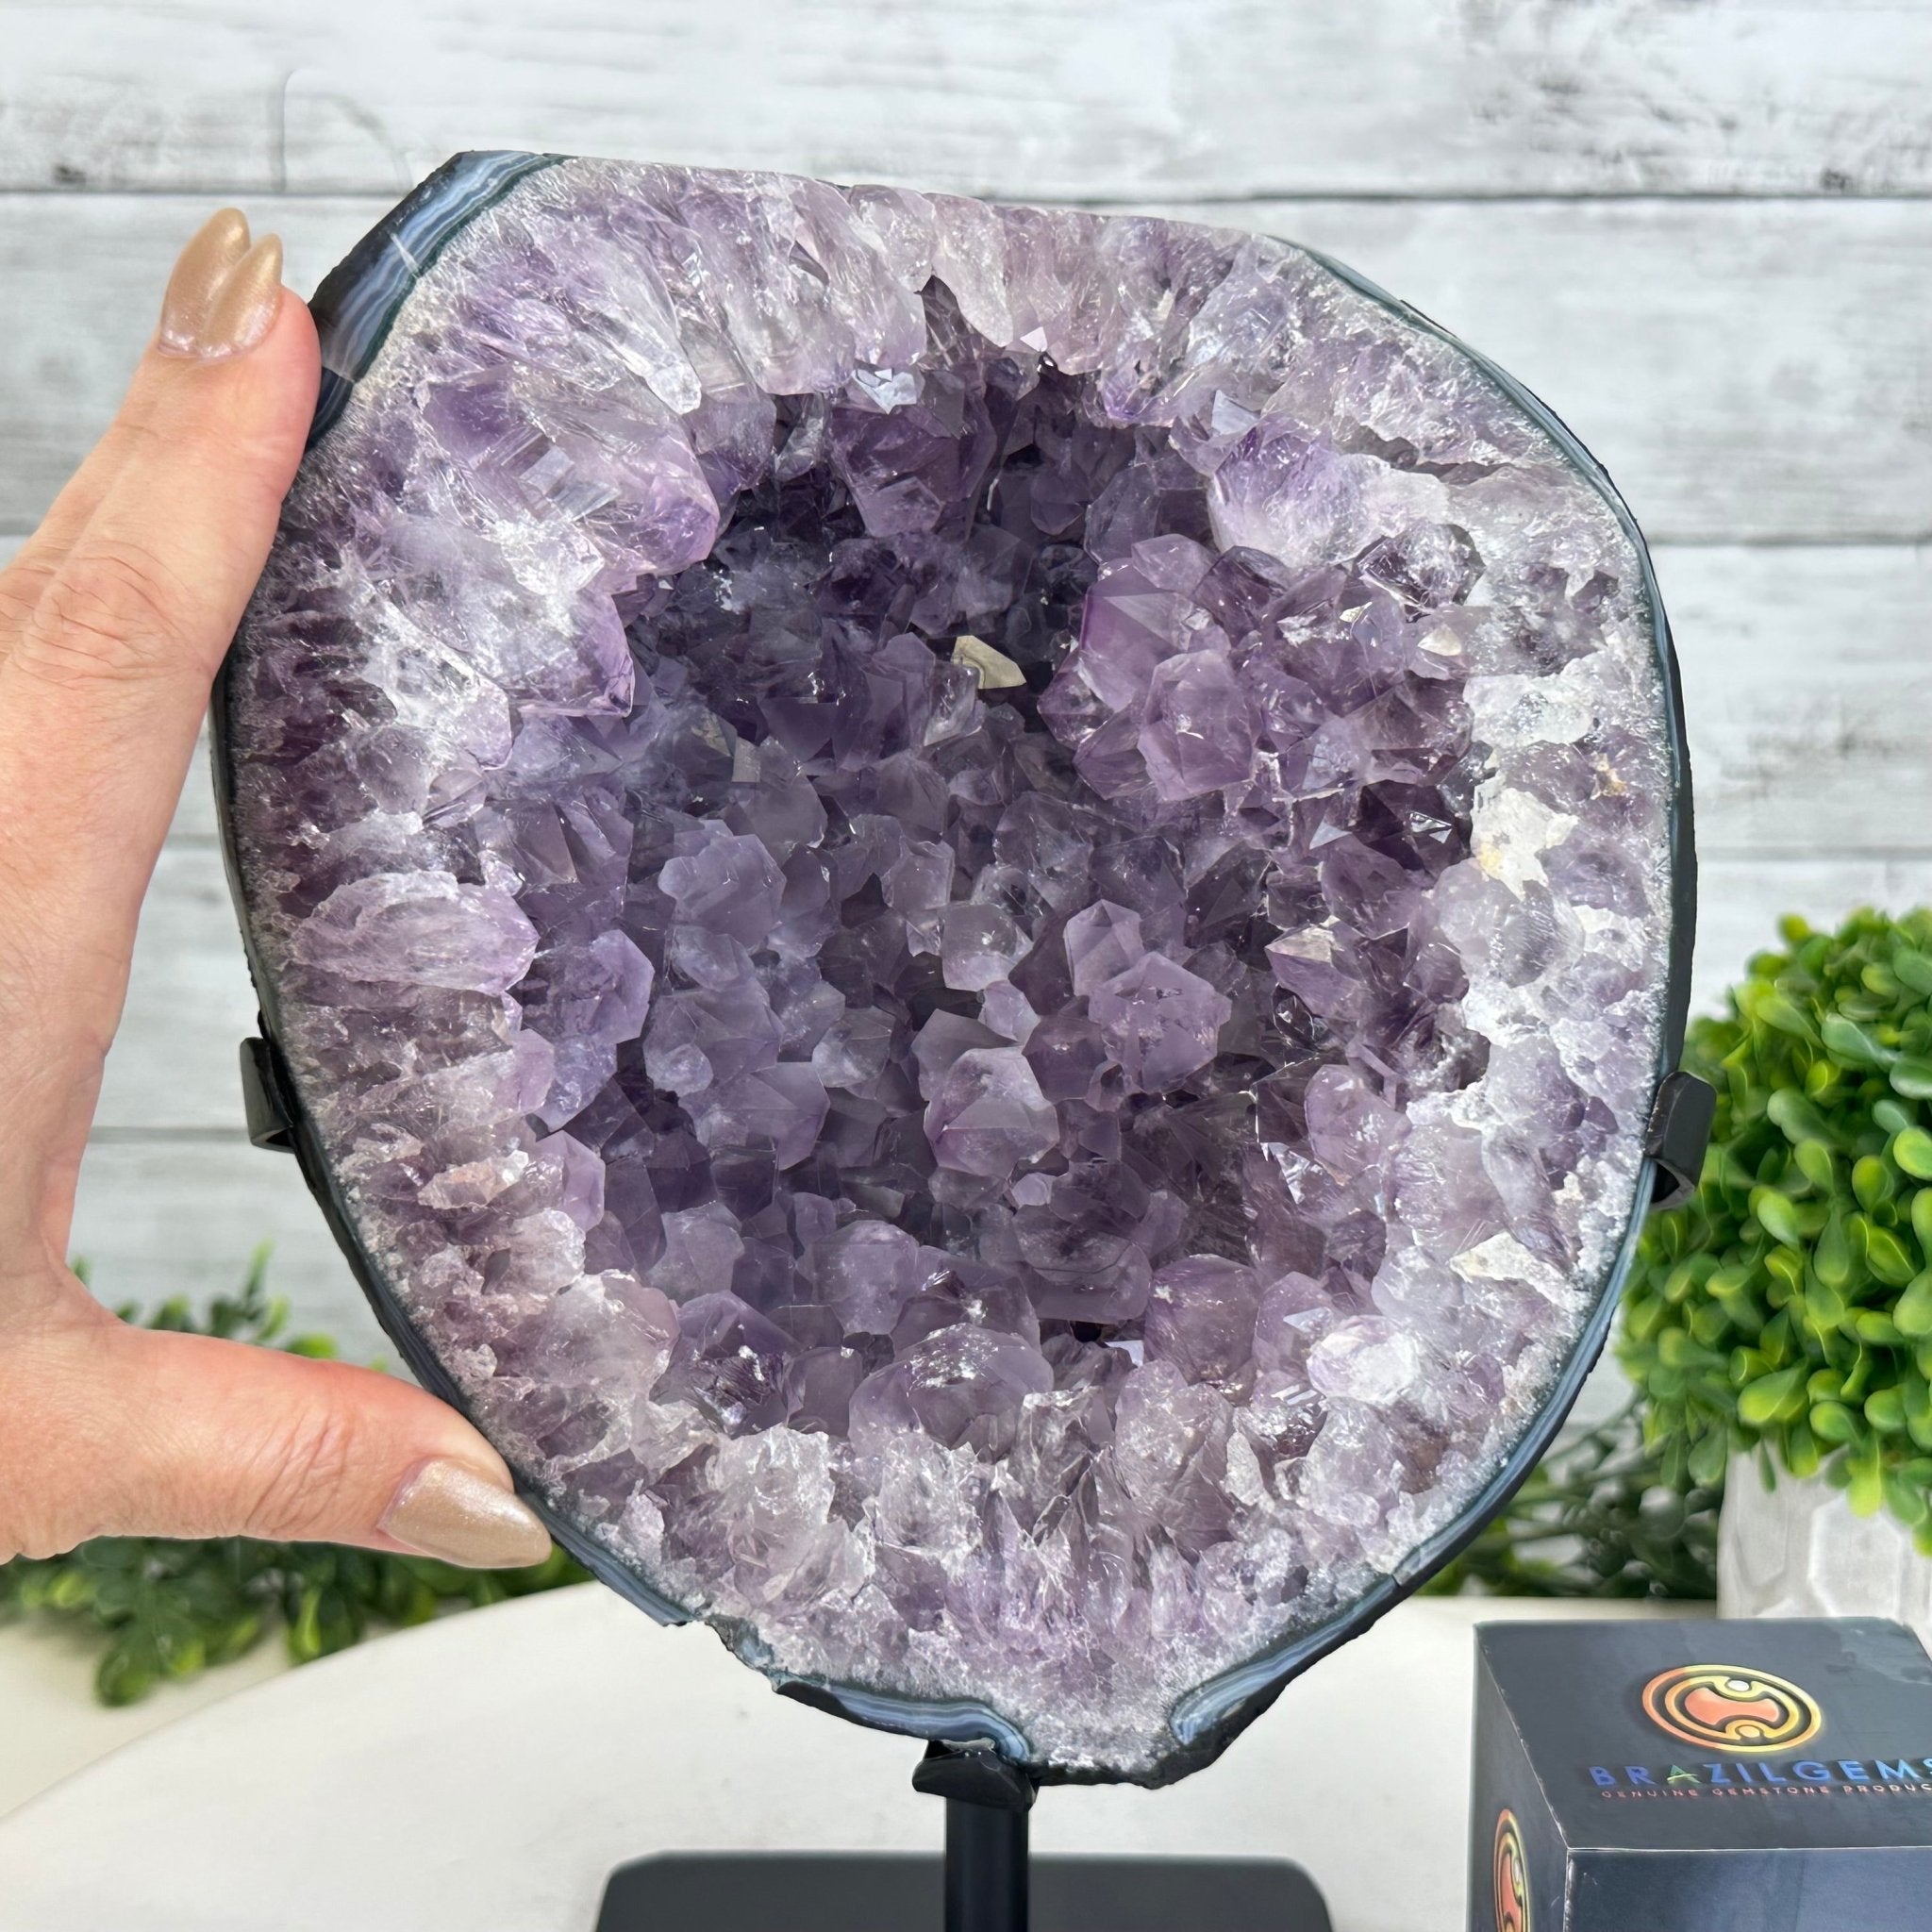 Quality Amethyst Cluster on a Metal Base, 13.3 lbs & 11" Tall #5491 - 0048 - Brazil GemsBrazil GemsQuality Amethyst Cluster on a Metal Base, 13.3 lbs & 11" Tall #5491 - 0048Clusters on Fixed Bases5491 - 0048